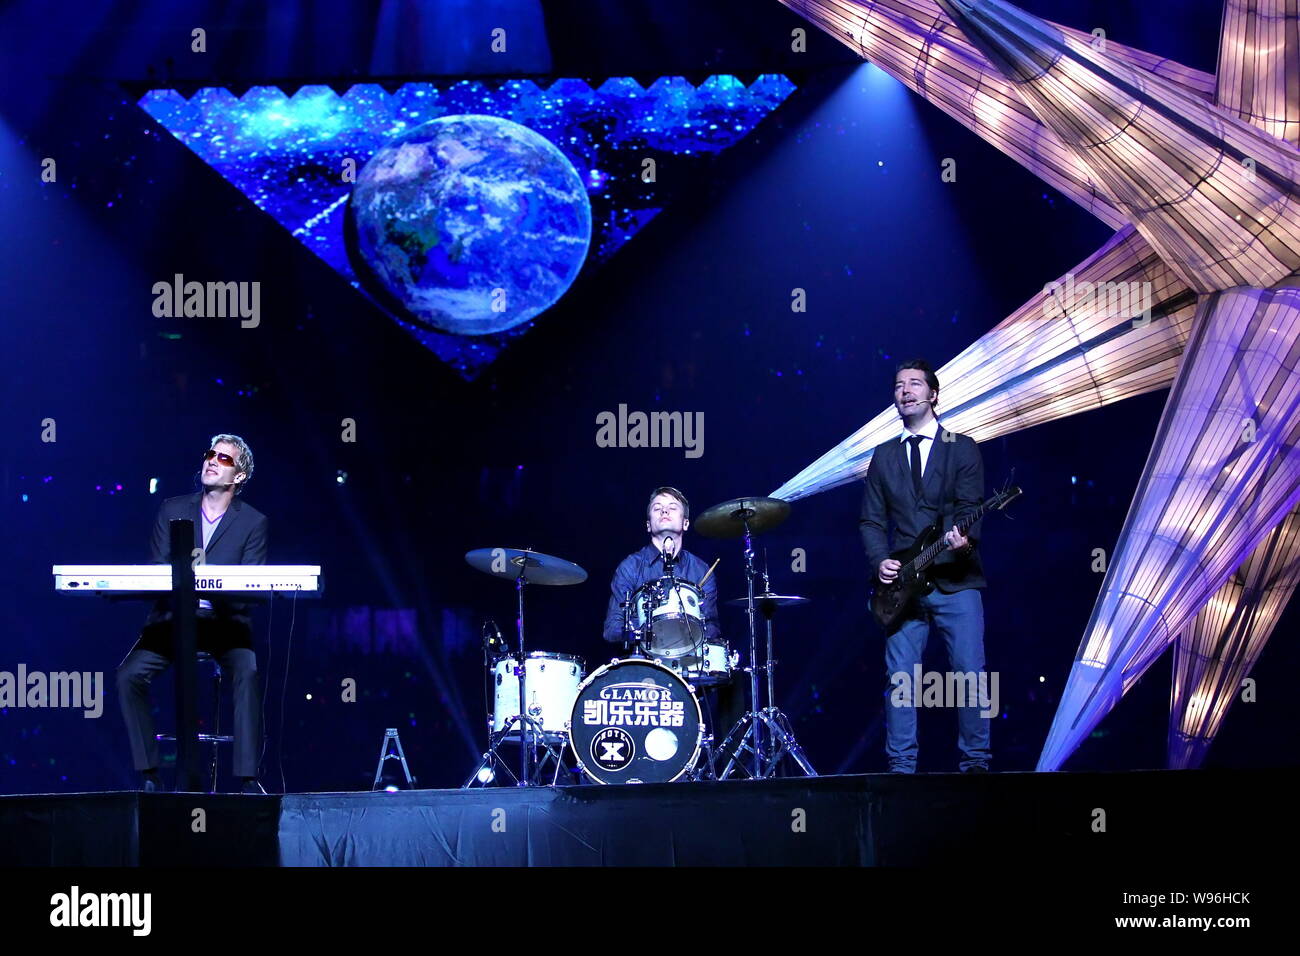 Members of Danish rock band Michael Learns to Rock, also known as MLTR, perform at the opening gala of the 2012 Nanning International Folk Song Arts F Stock Photo